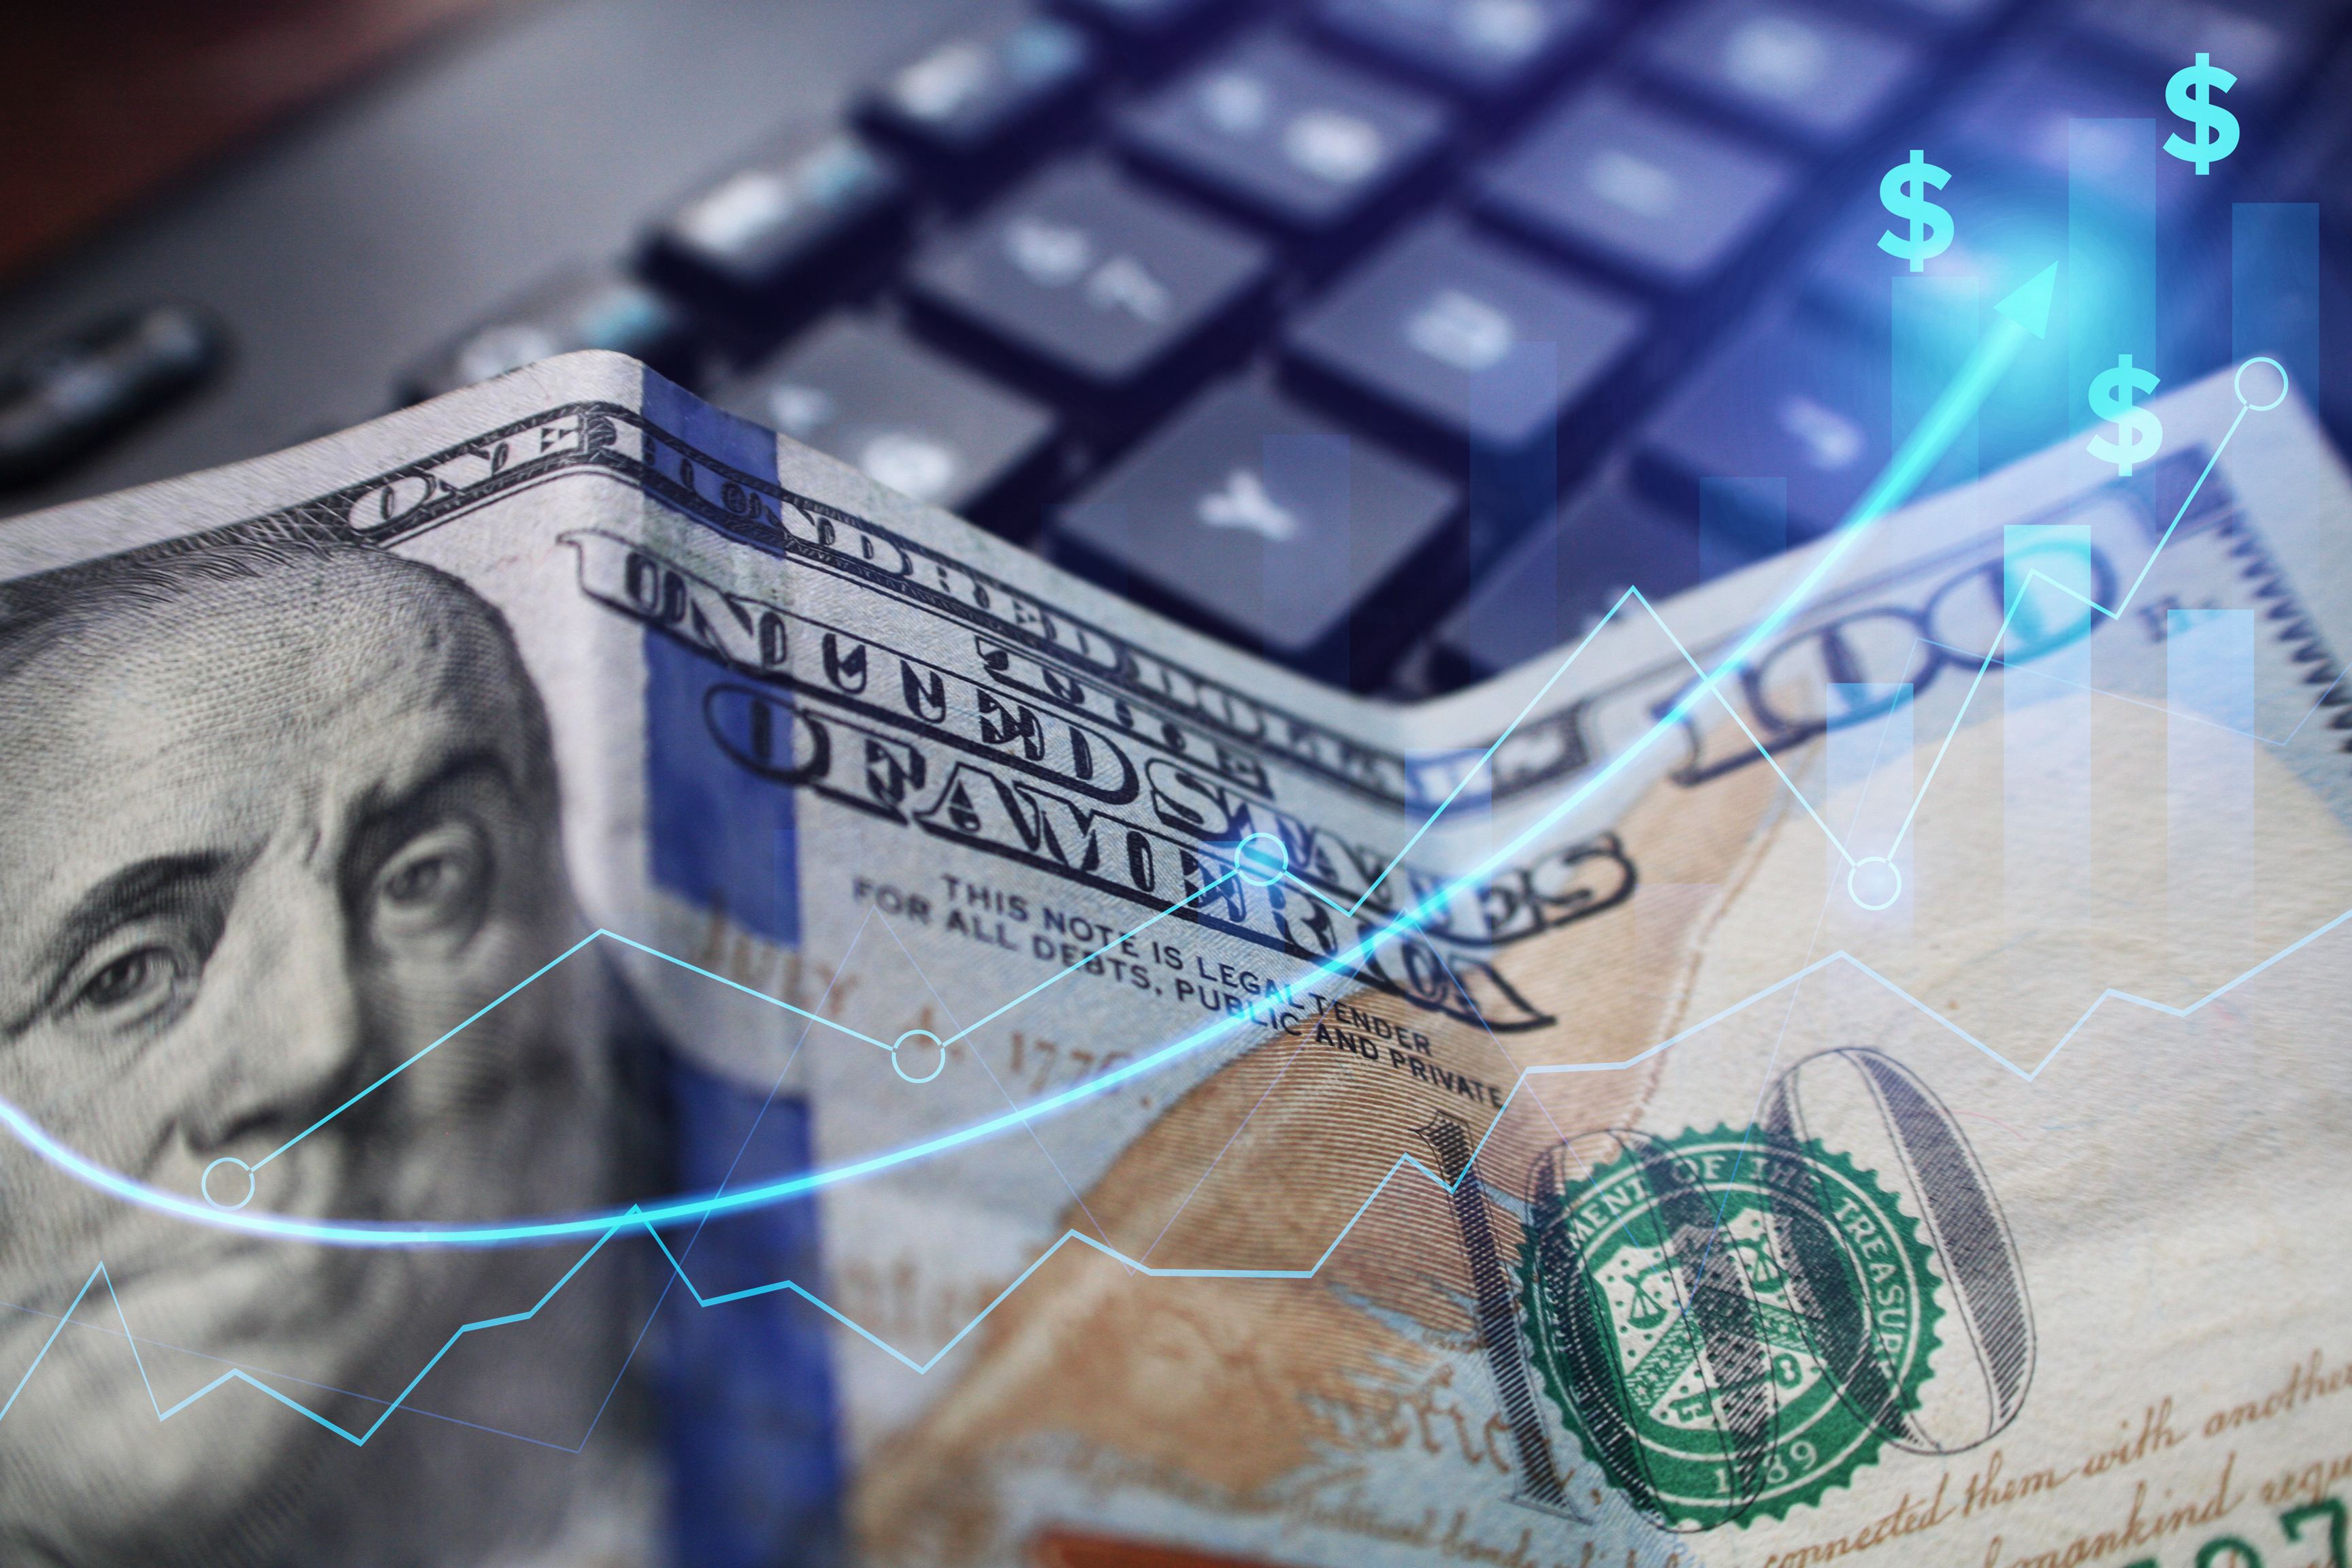 100 dollar bill sitting on keyboard with rising graph overlaid